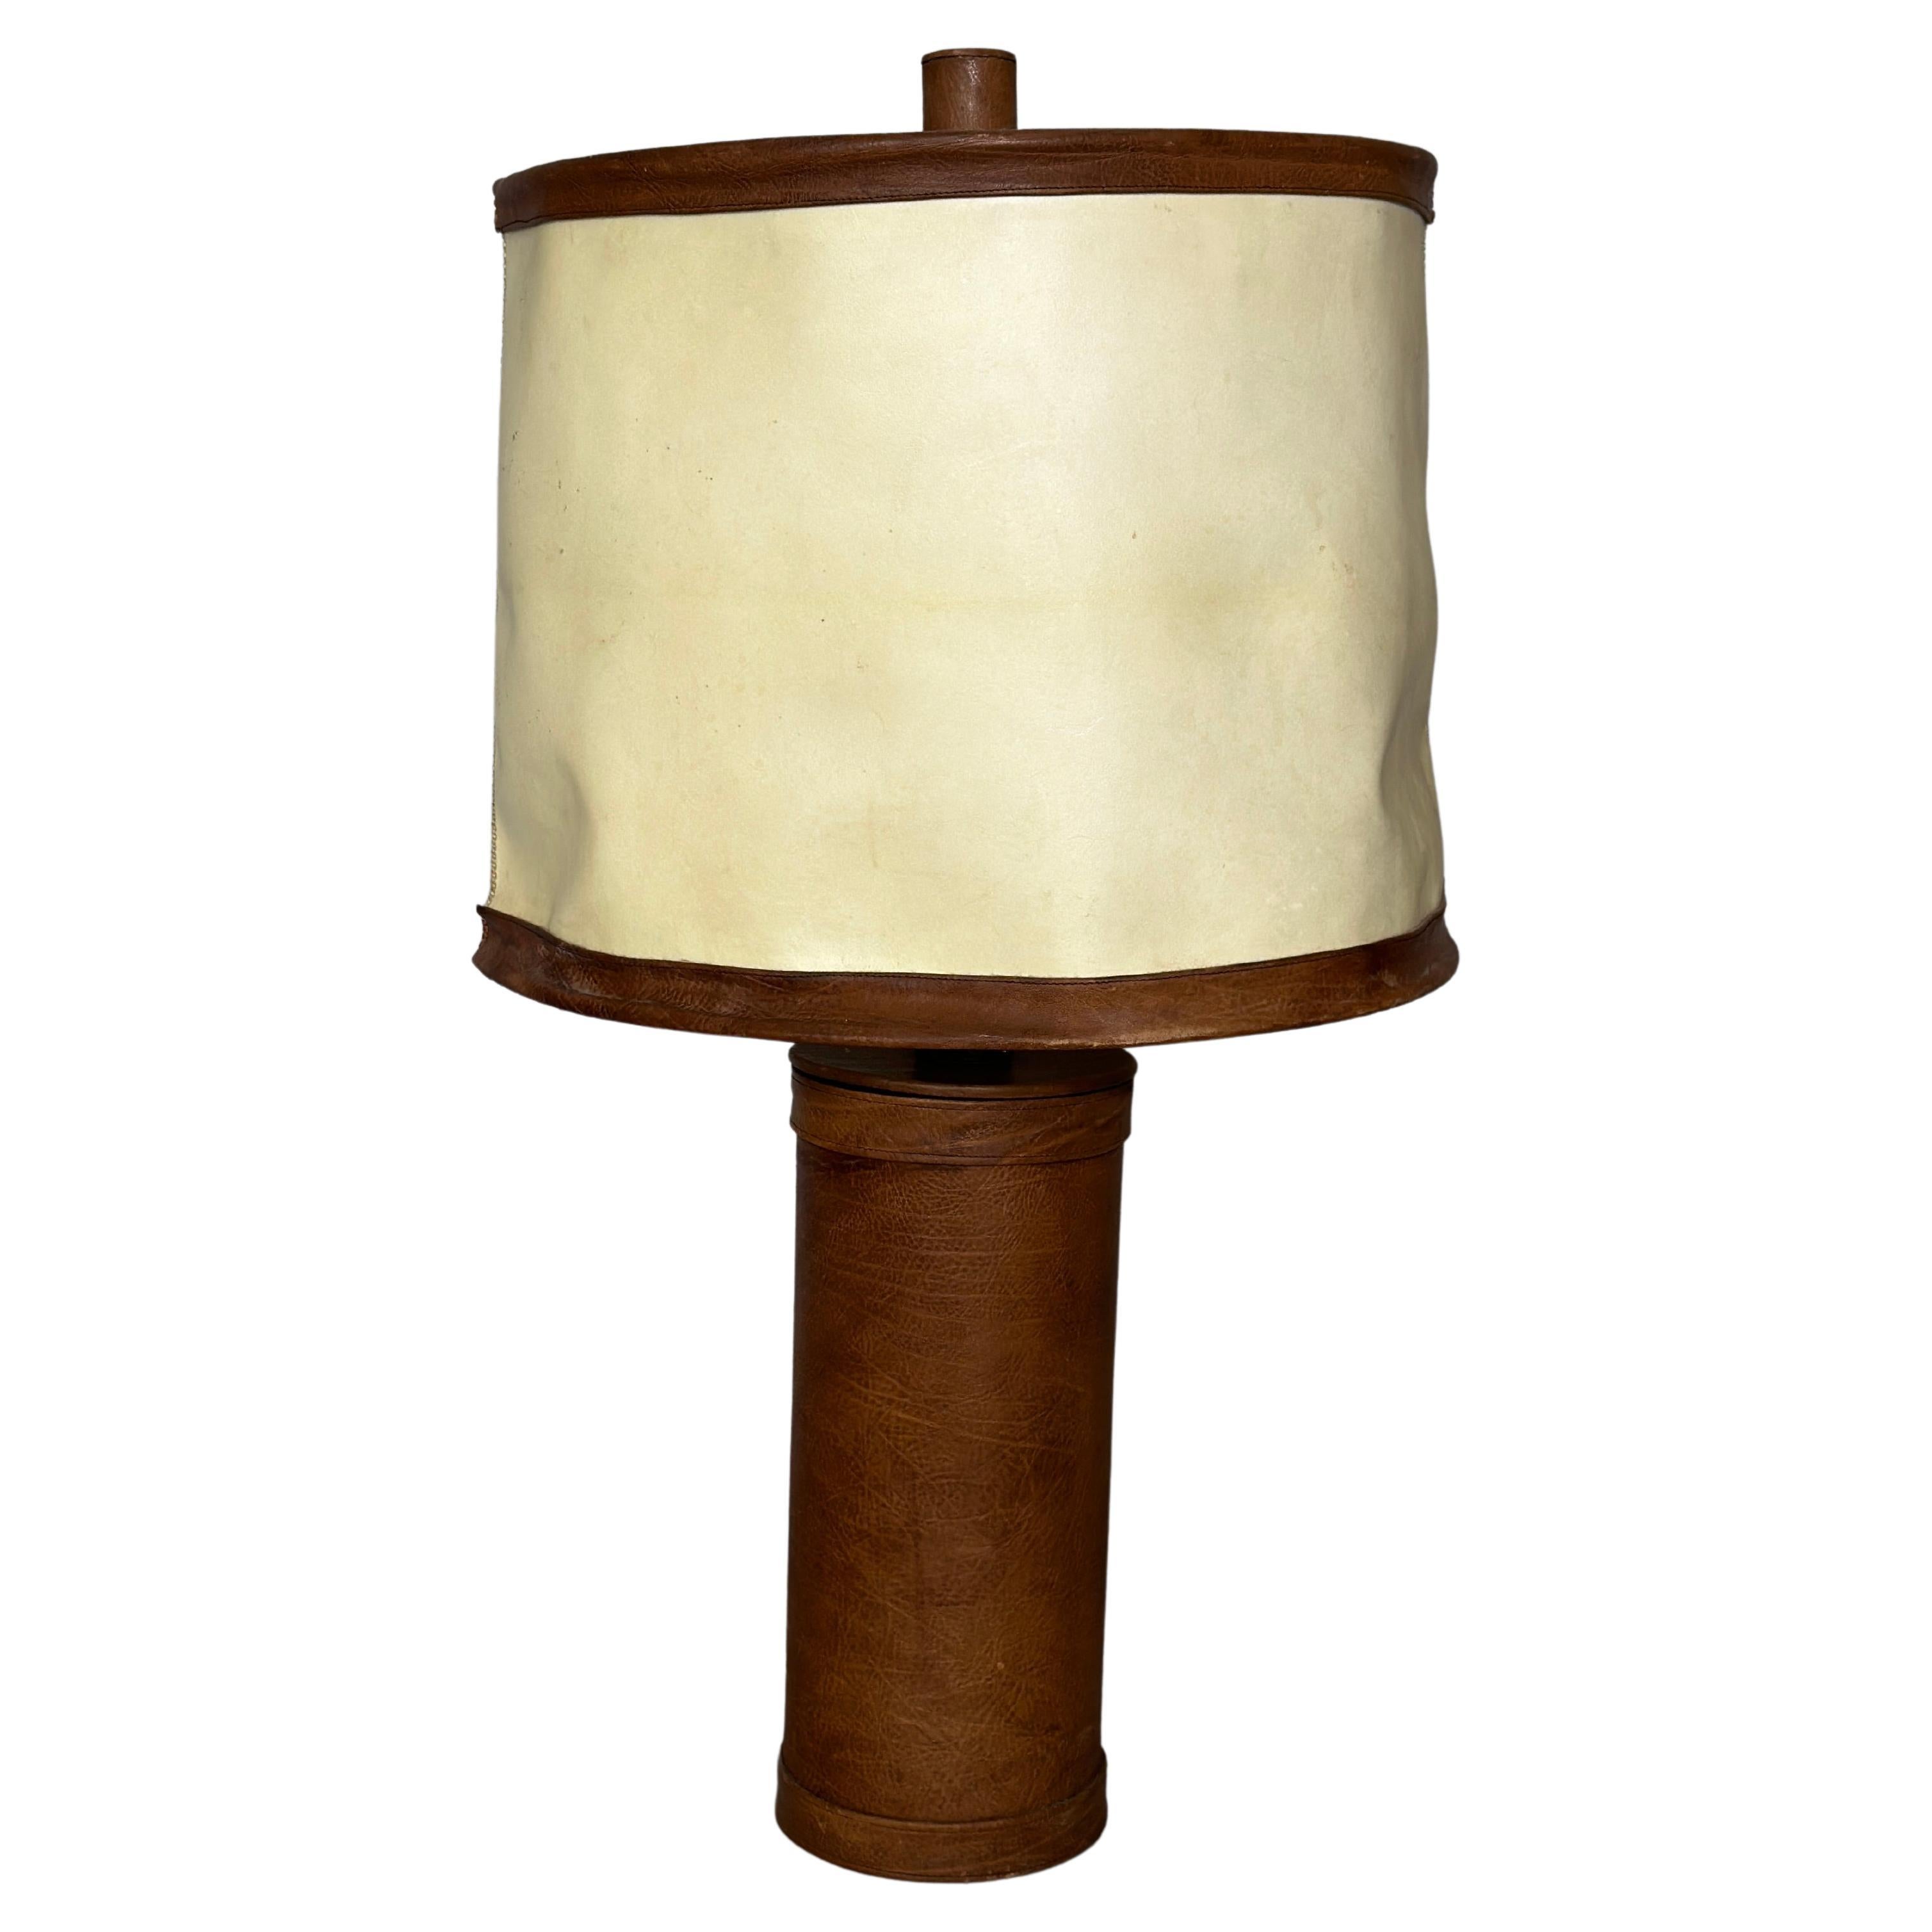 Charlotte Wawer Leather Table Lamp, 1940s For Sale